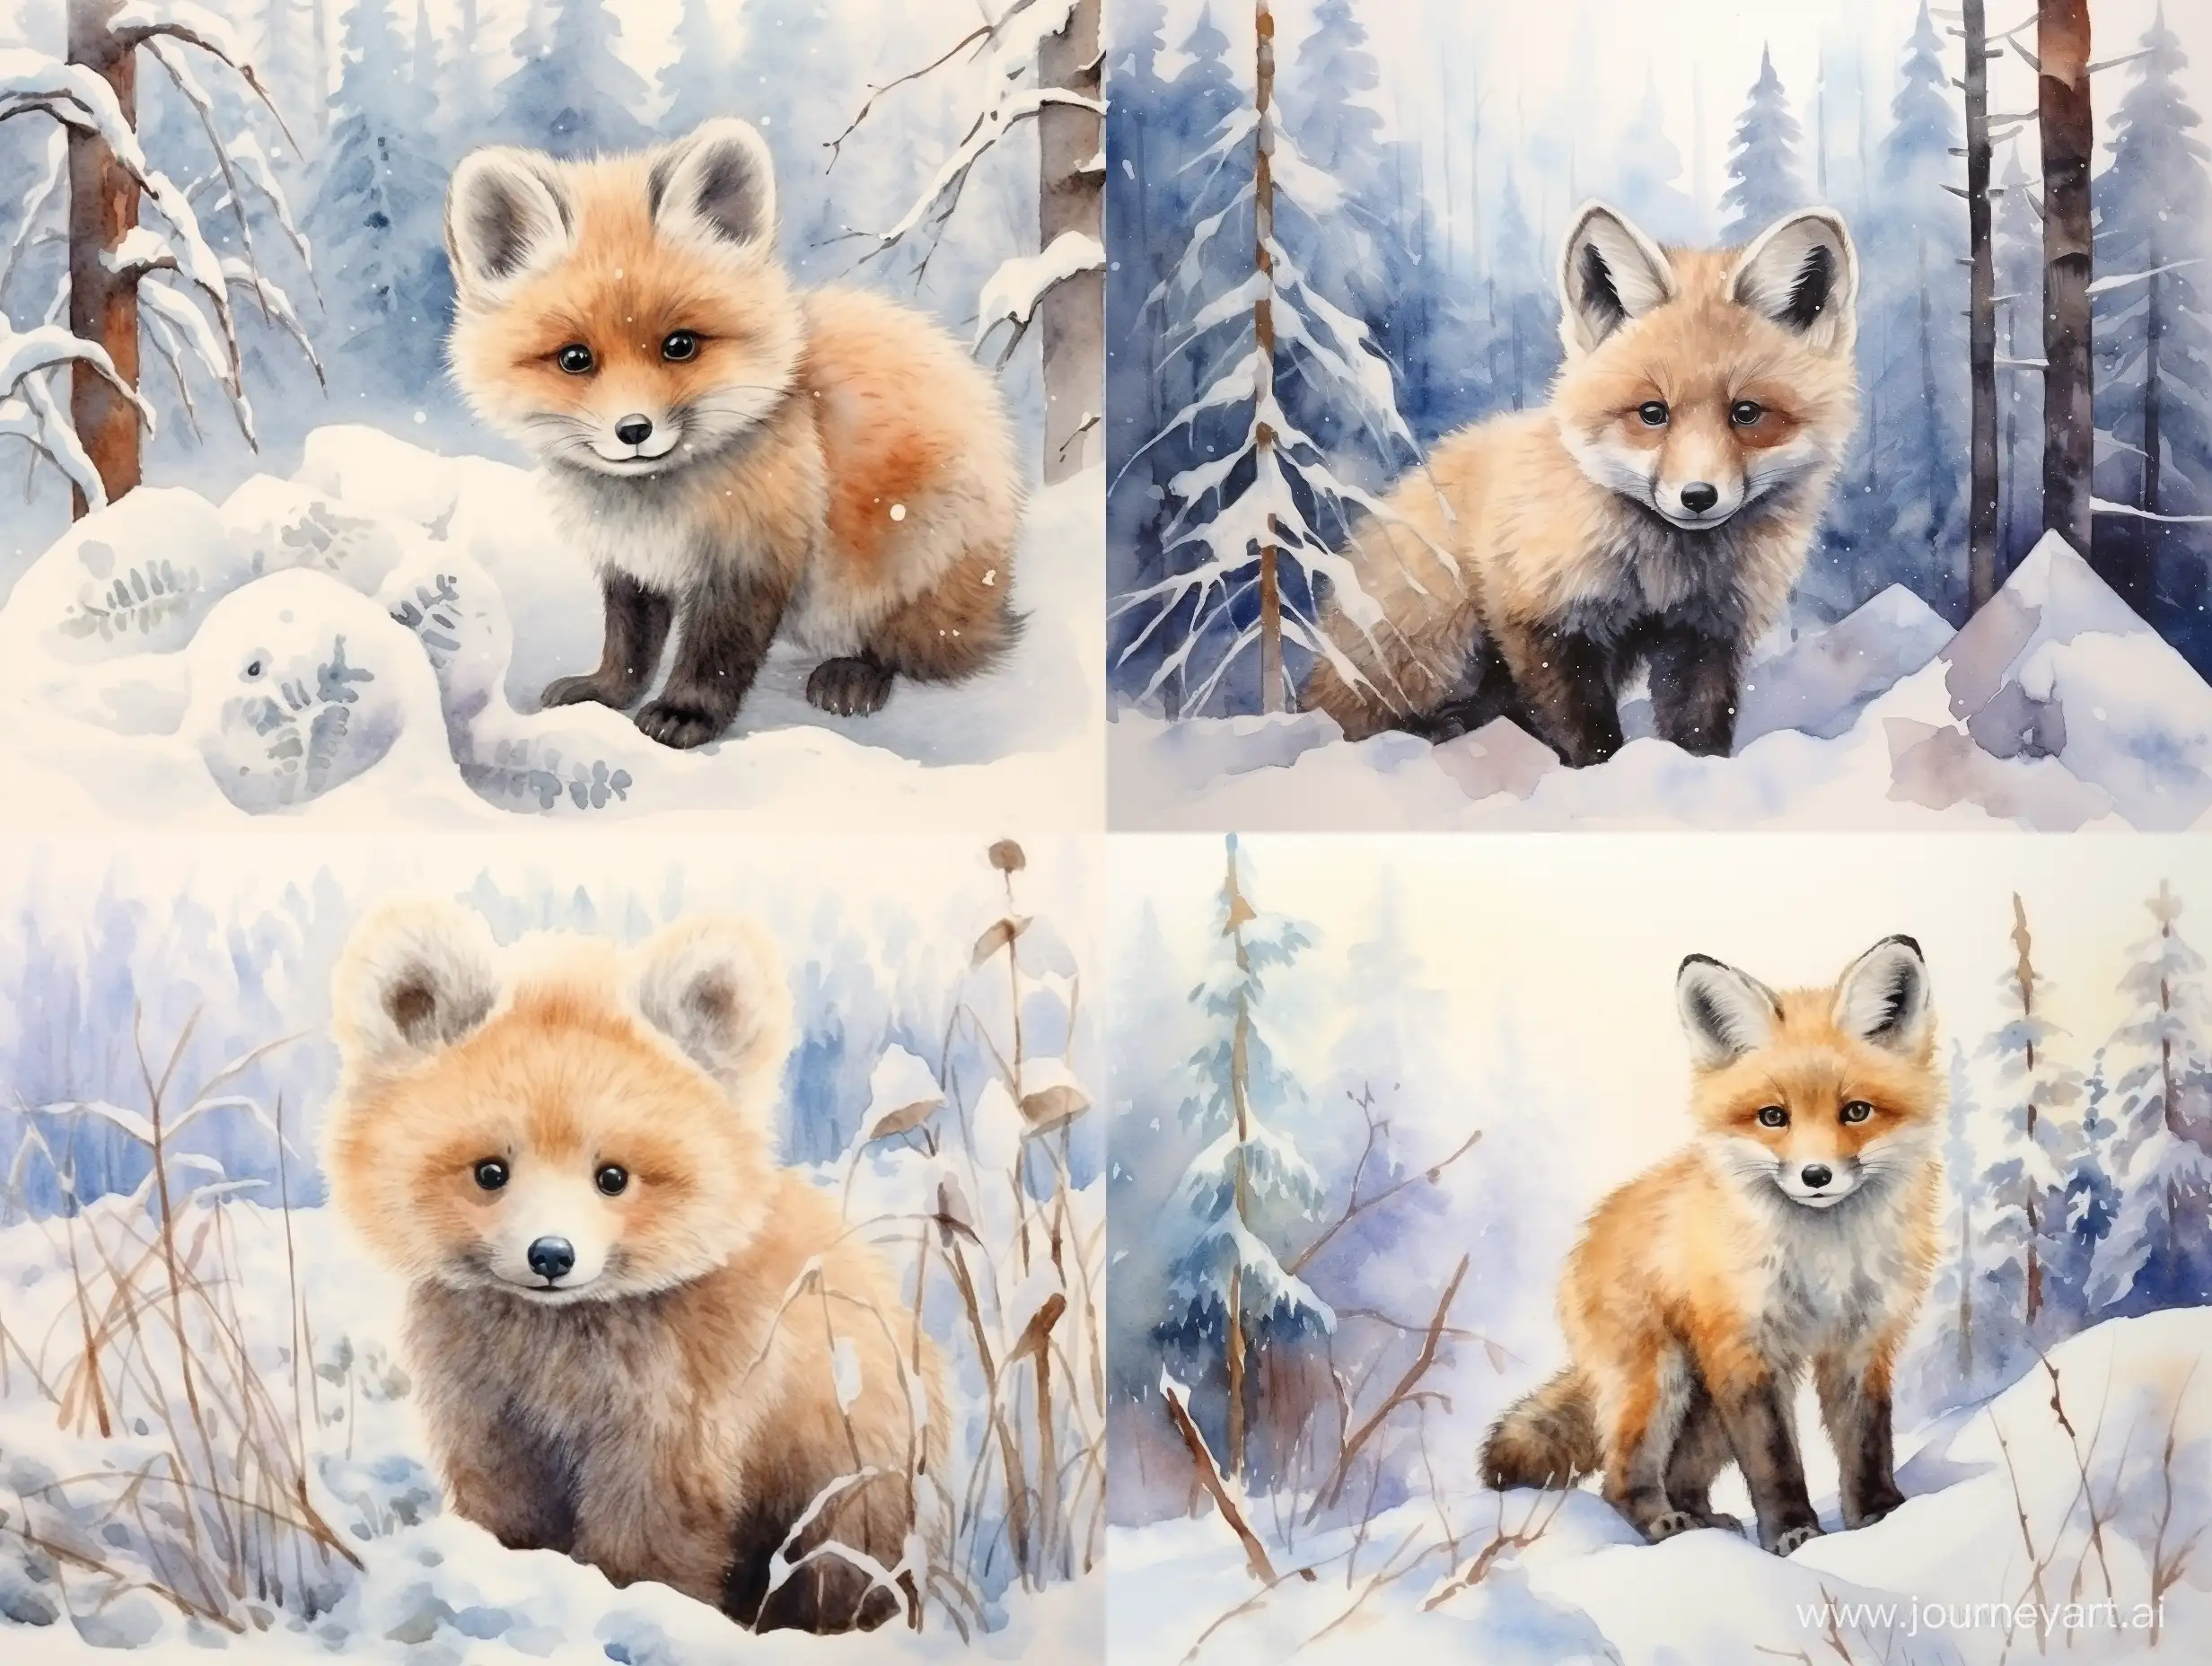 Adorable-Fox-Cub-in-Winter-Hat-Amidst-Watercolor-Winter-Forest